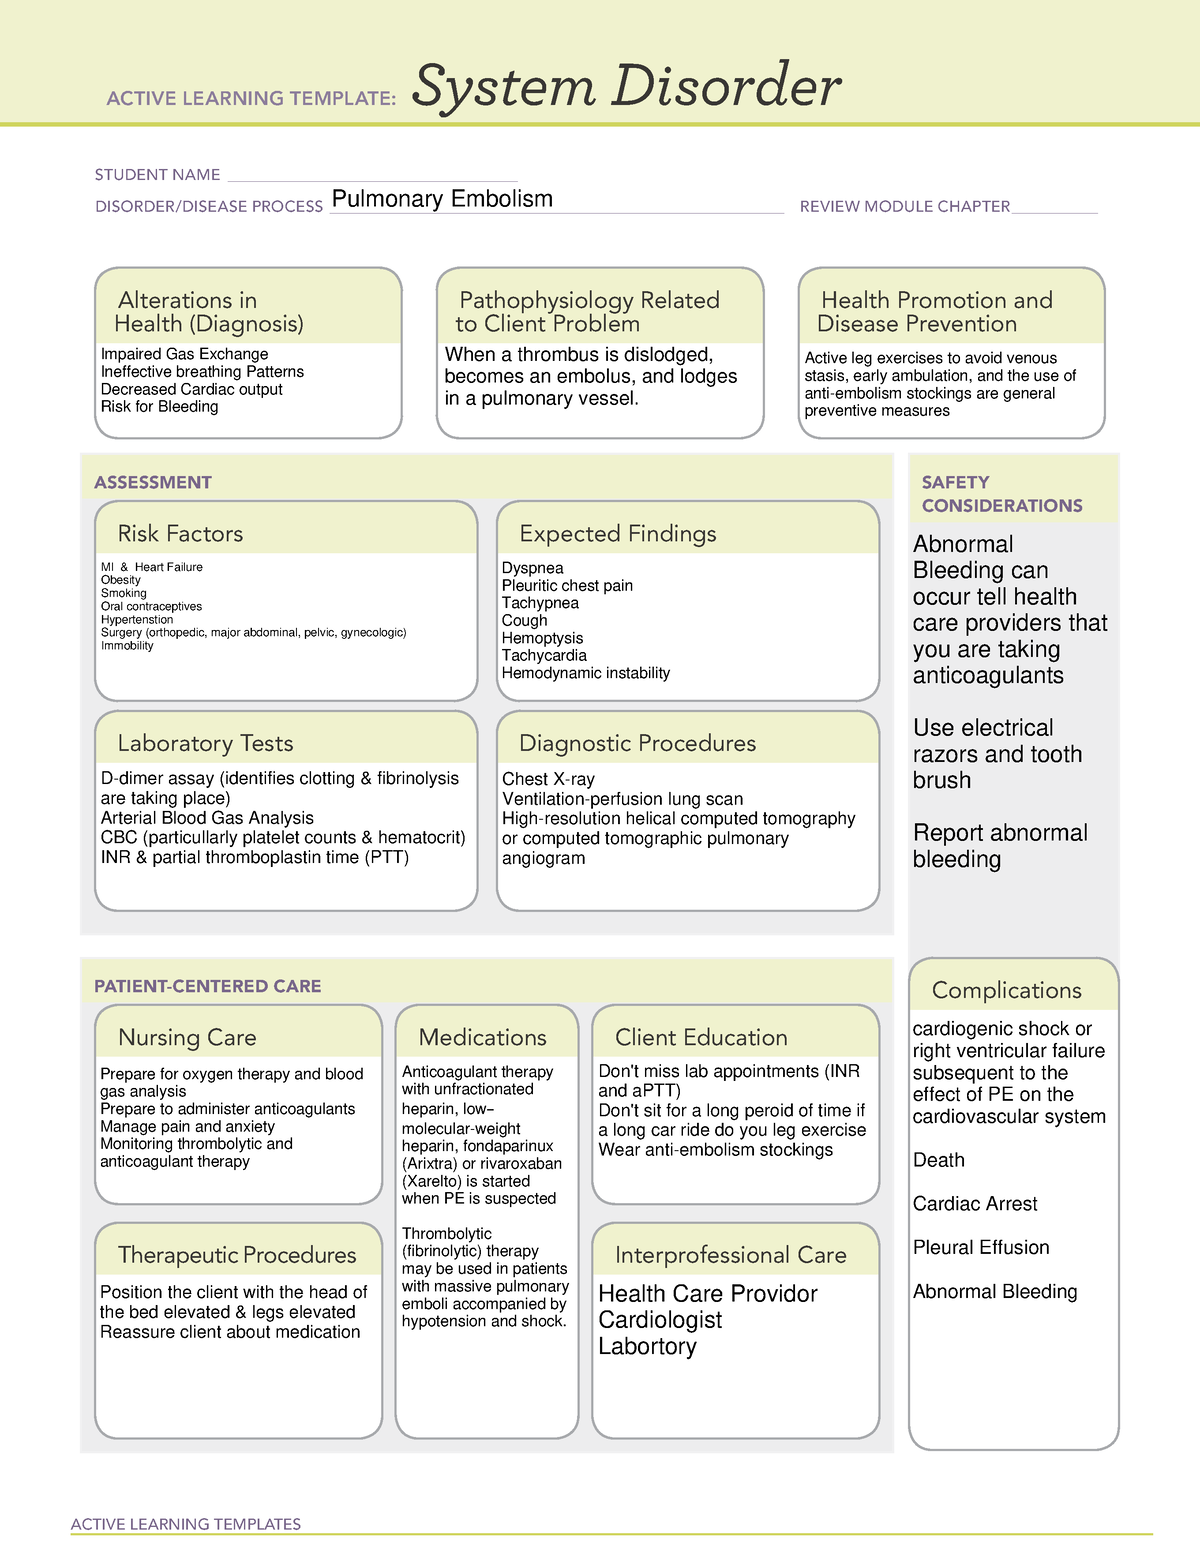 System Disorder blank - ACTIVE LEARNING TEMPLATES System Disorder ...